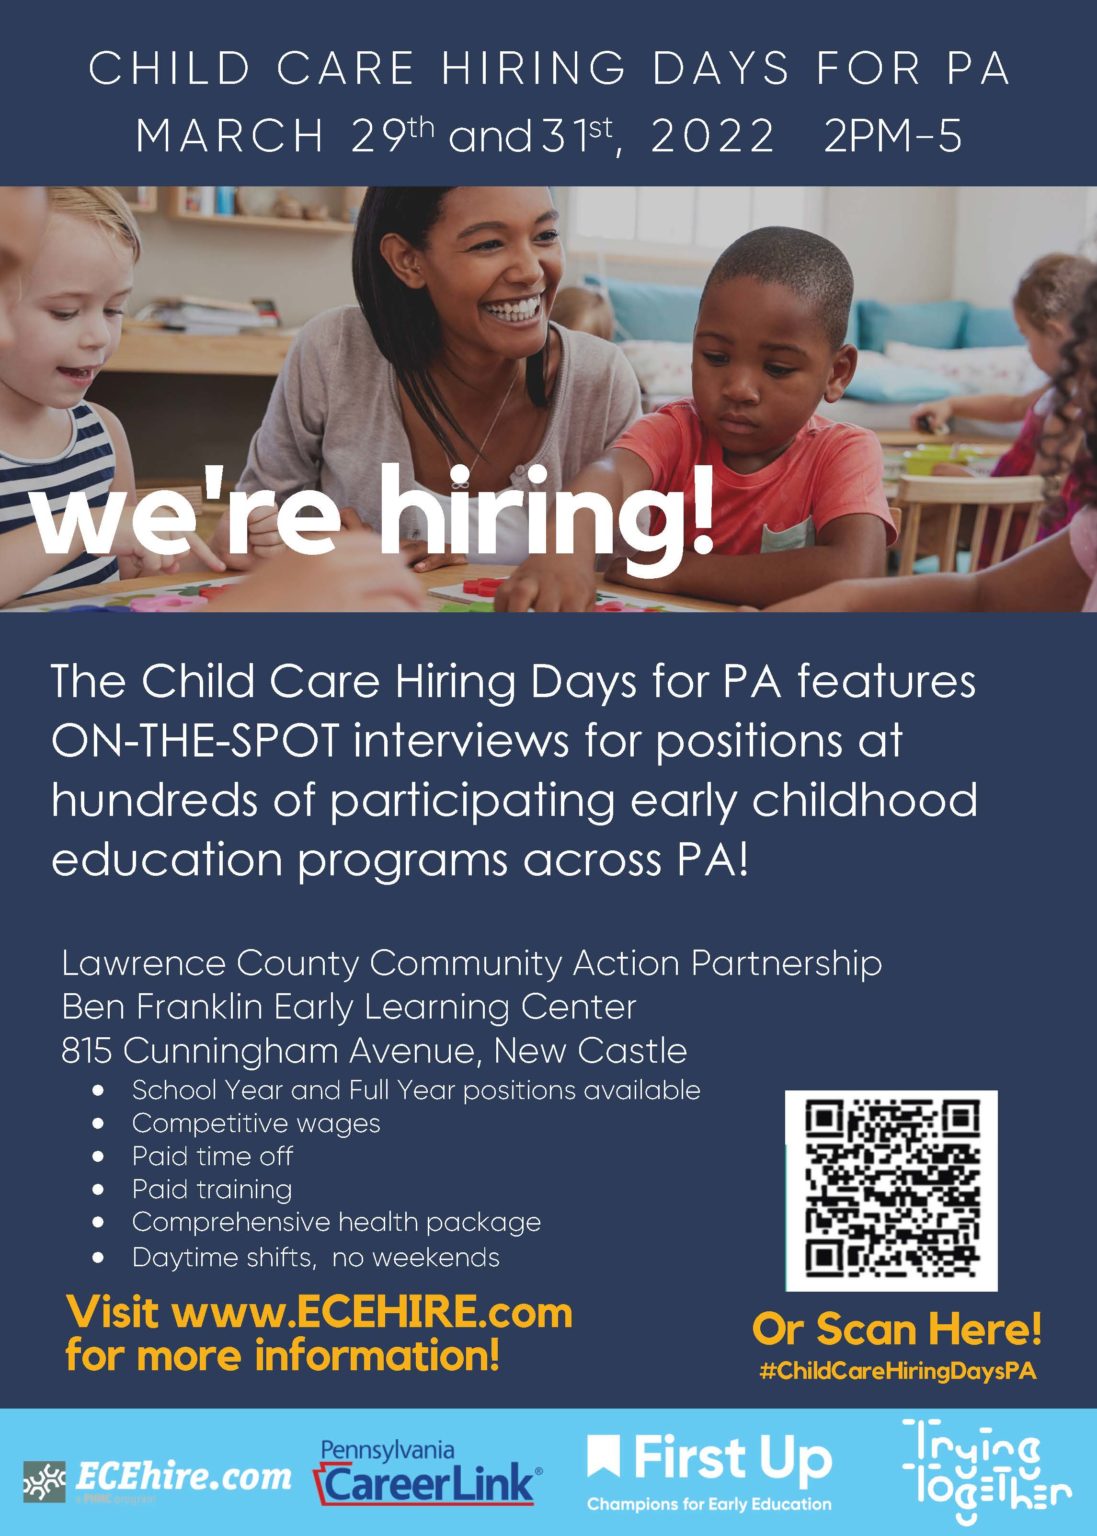 BF Child Care Hiring Days For PA Flyer 1097x1536 